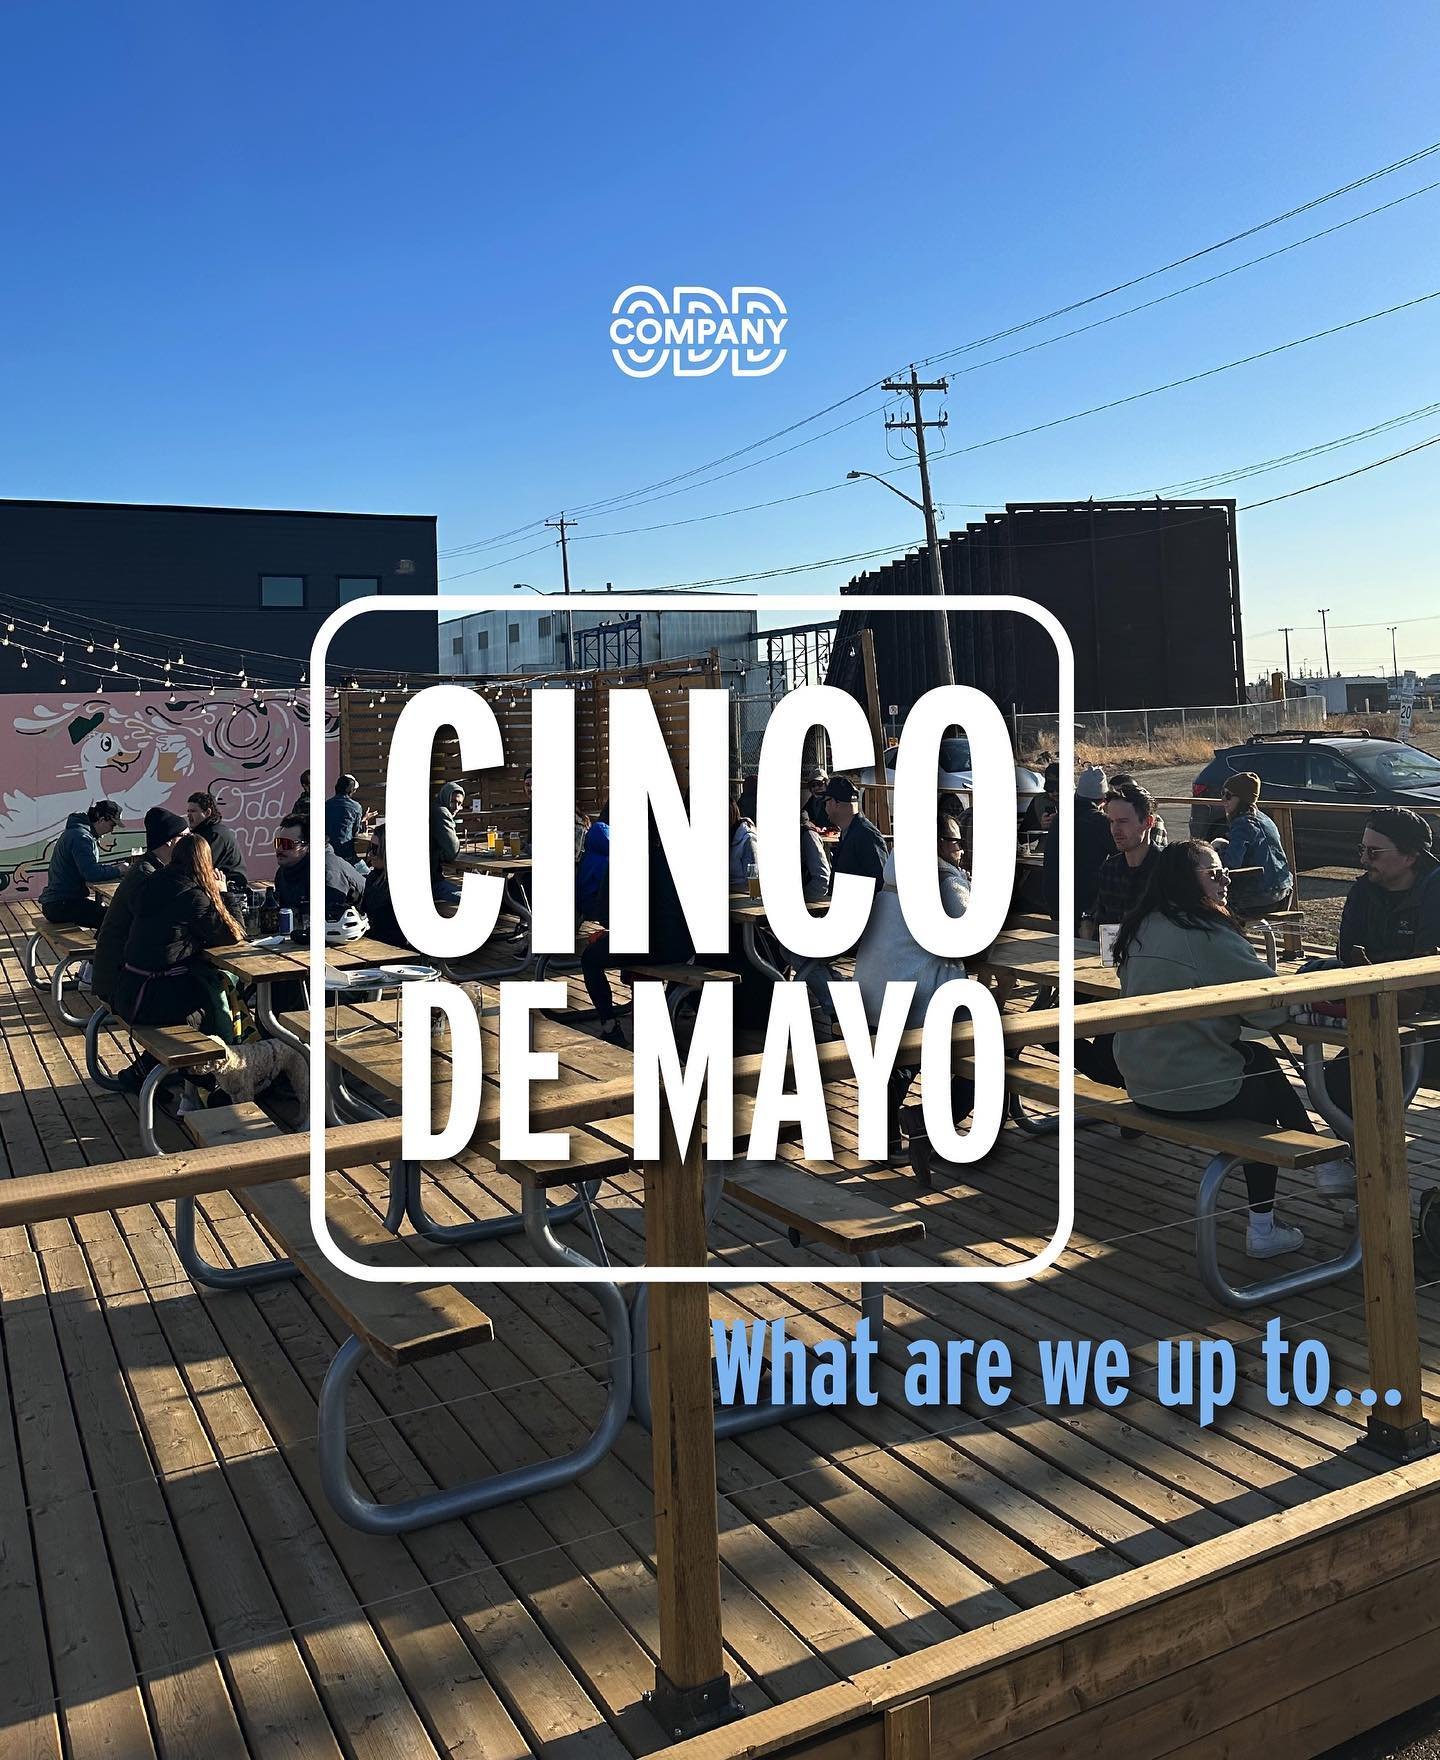 🎉 Cinco de Mayo Sunday Celebration! &bull; Tomorow || 12pm || Both Locations 🎉

TOMORROW (May 5th) - We&rsquo;re tapping two tasty one-day-only brews at both locations - 12pm! Pick your favourite spot/Cinco cask flavour and join the celebration! 💃